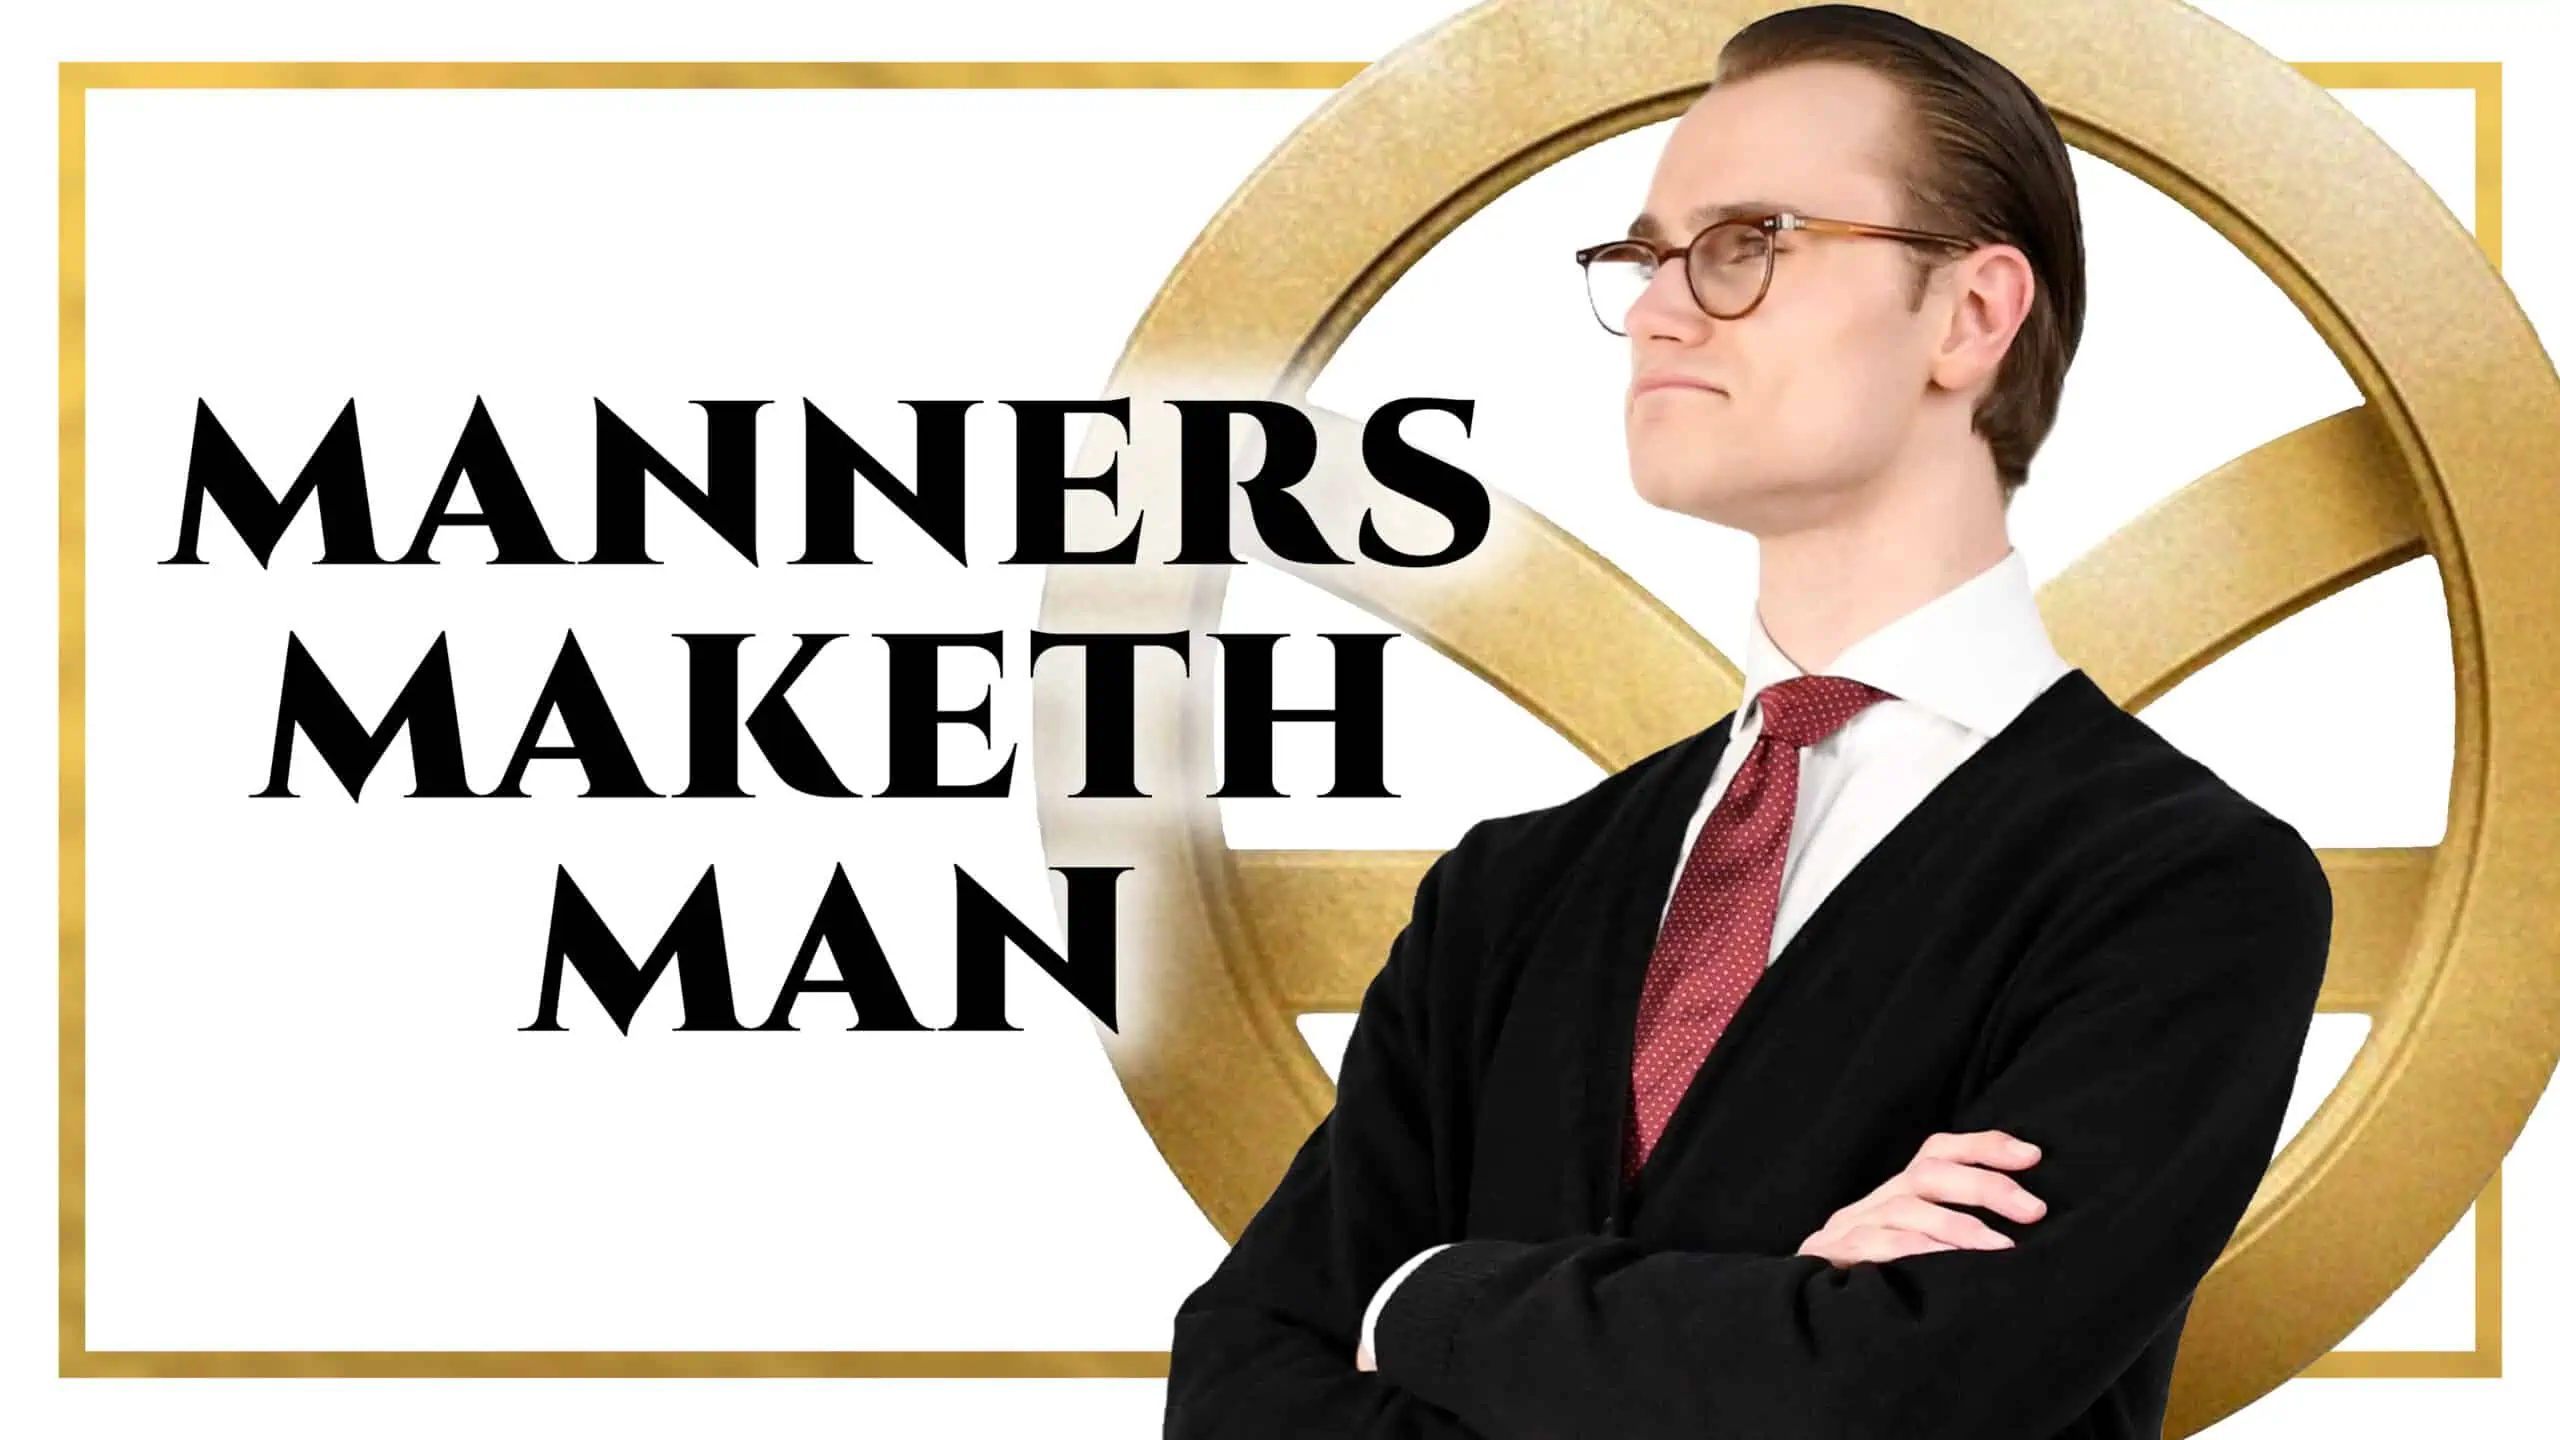 manners maketh man 3840x2160 scaled